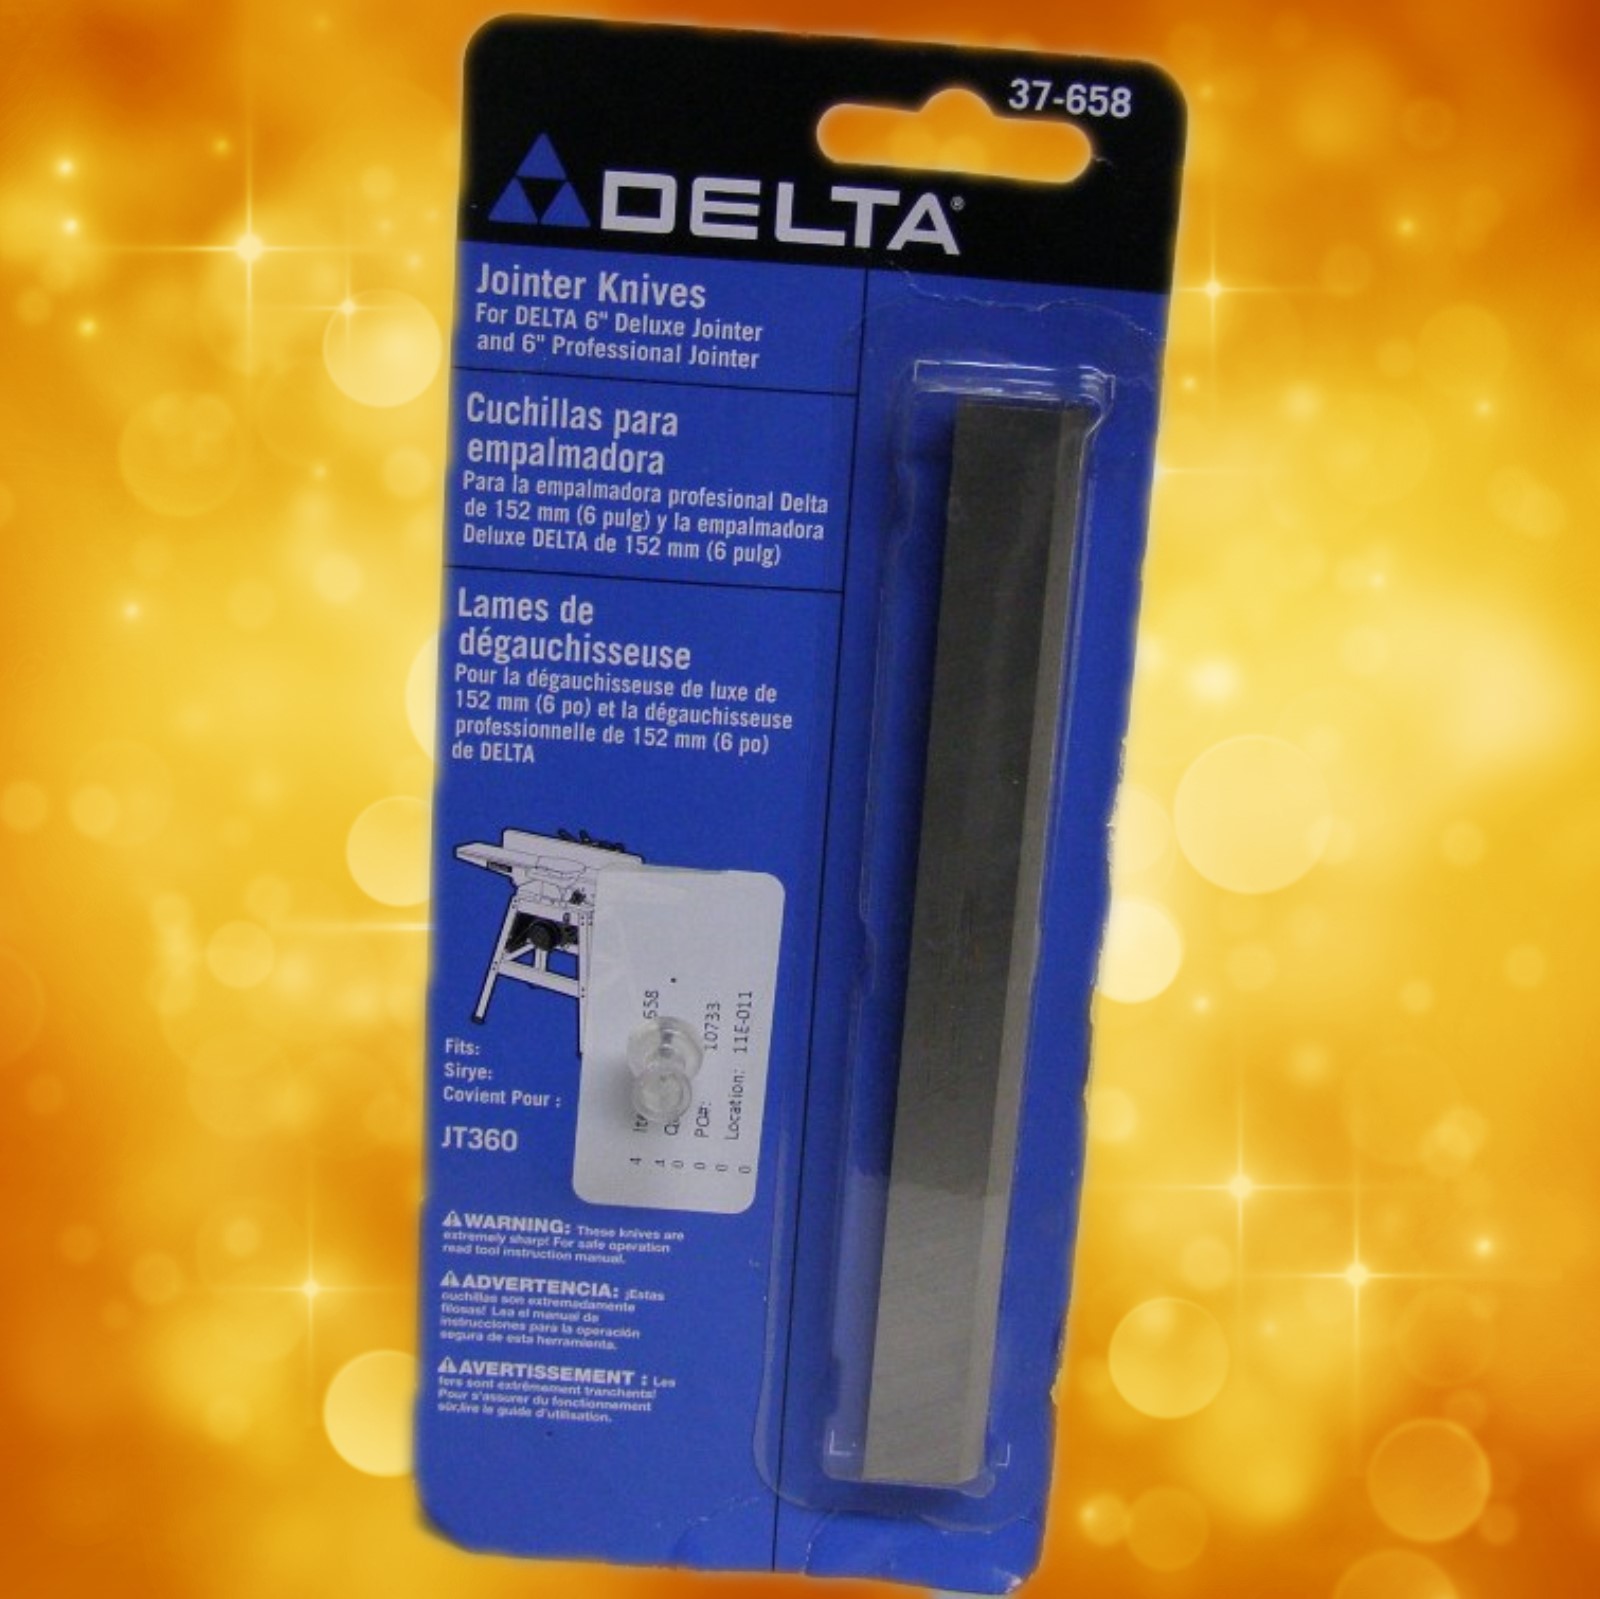  Delta 6" Jointer Knives-Package of 3 37-658